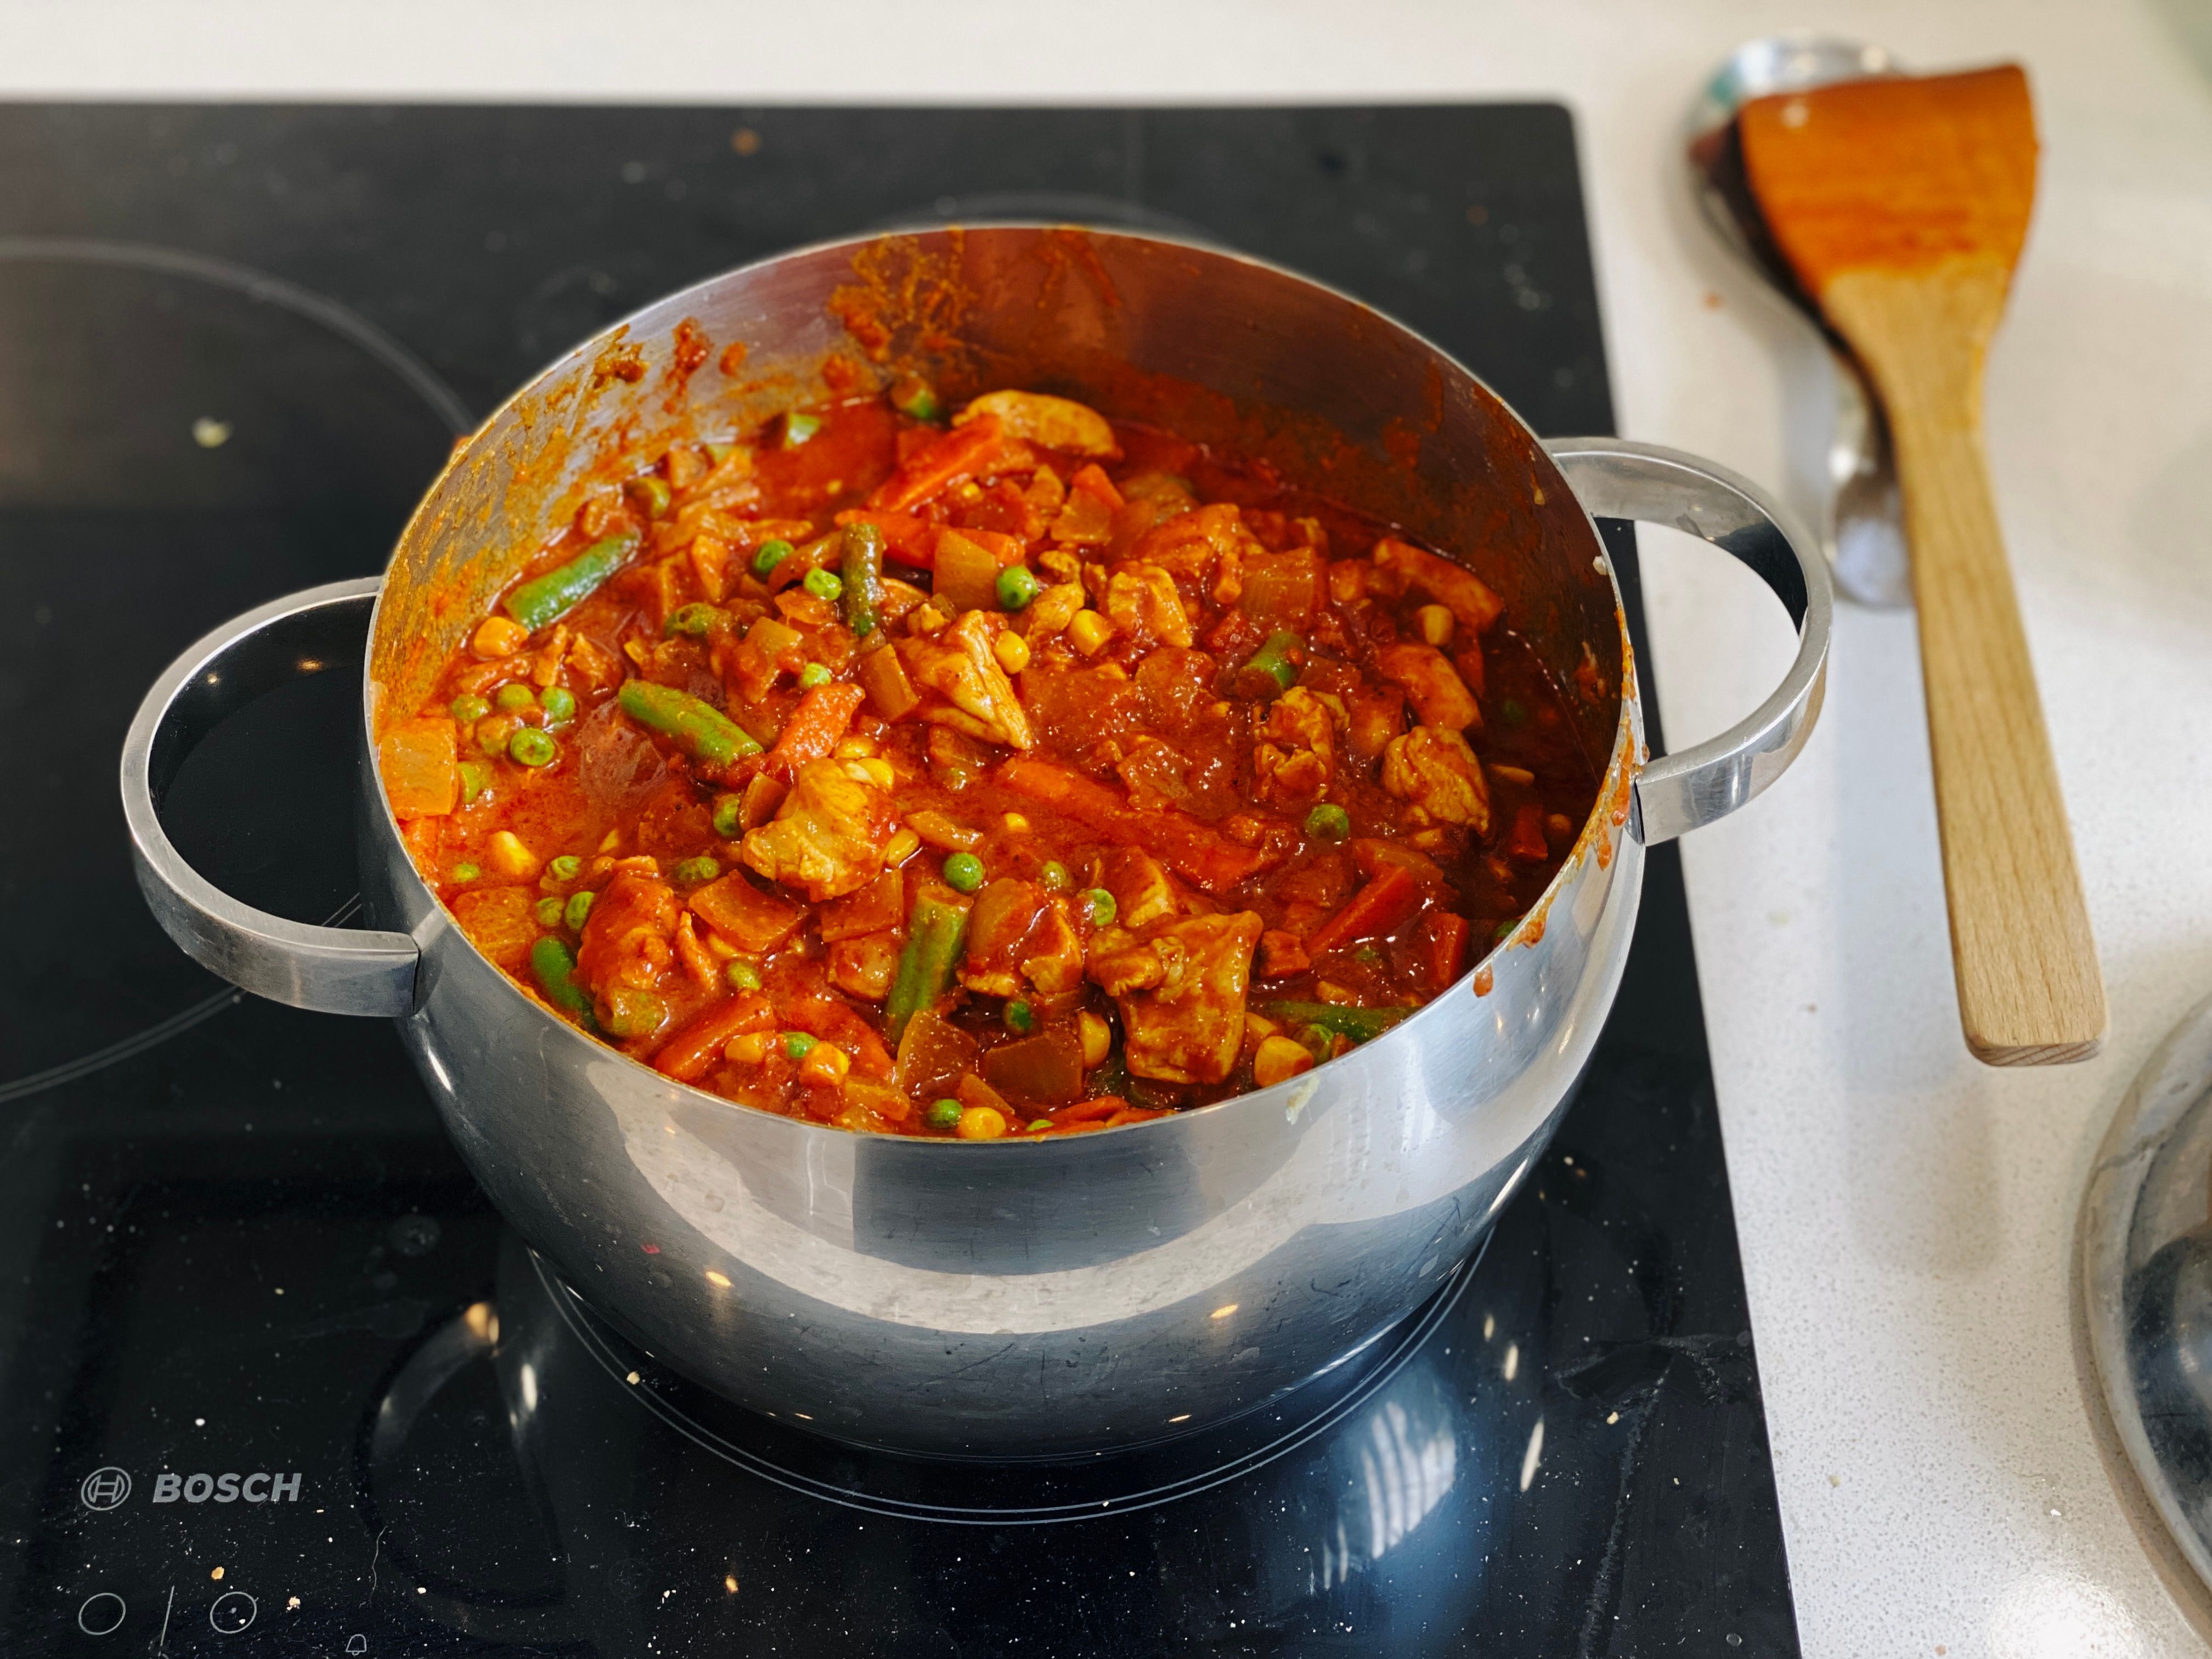 A big saucepan with a rich red chicken curry cooking in it. There's green beans, corns, carrot, and peas visible as well.